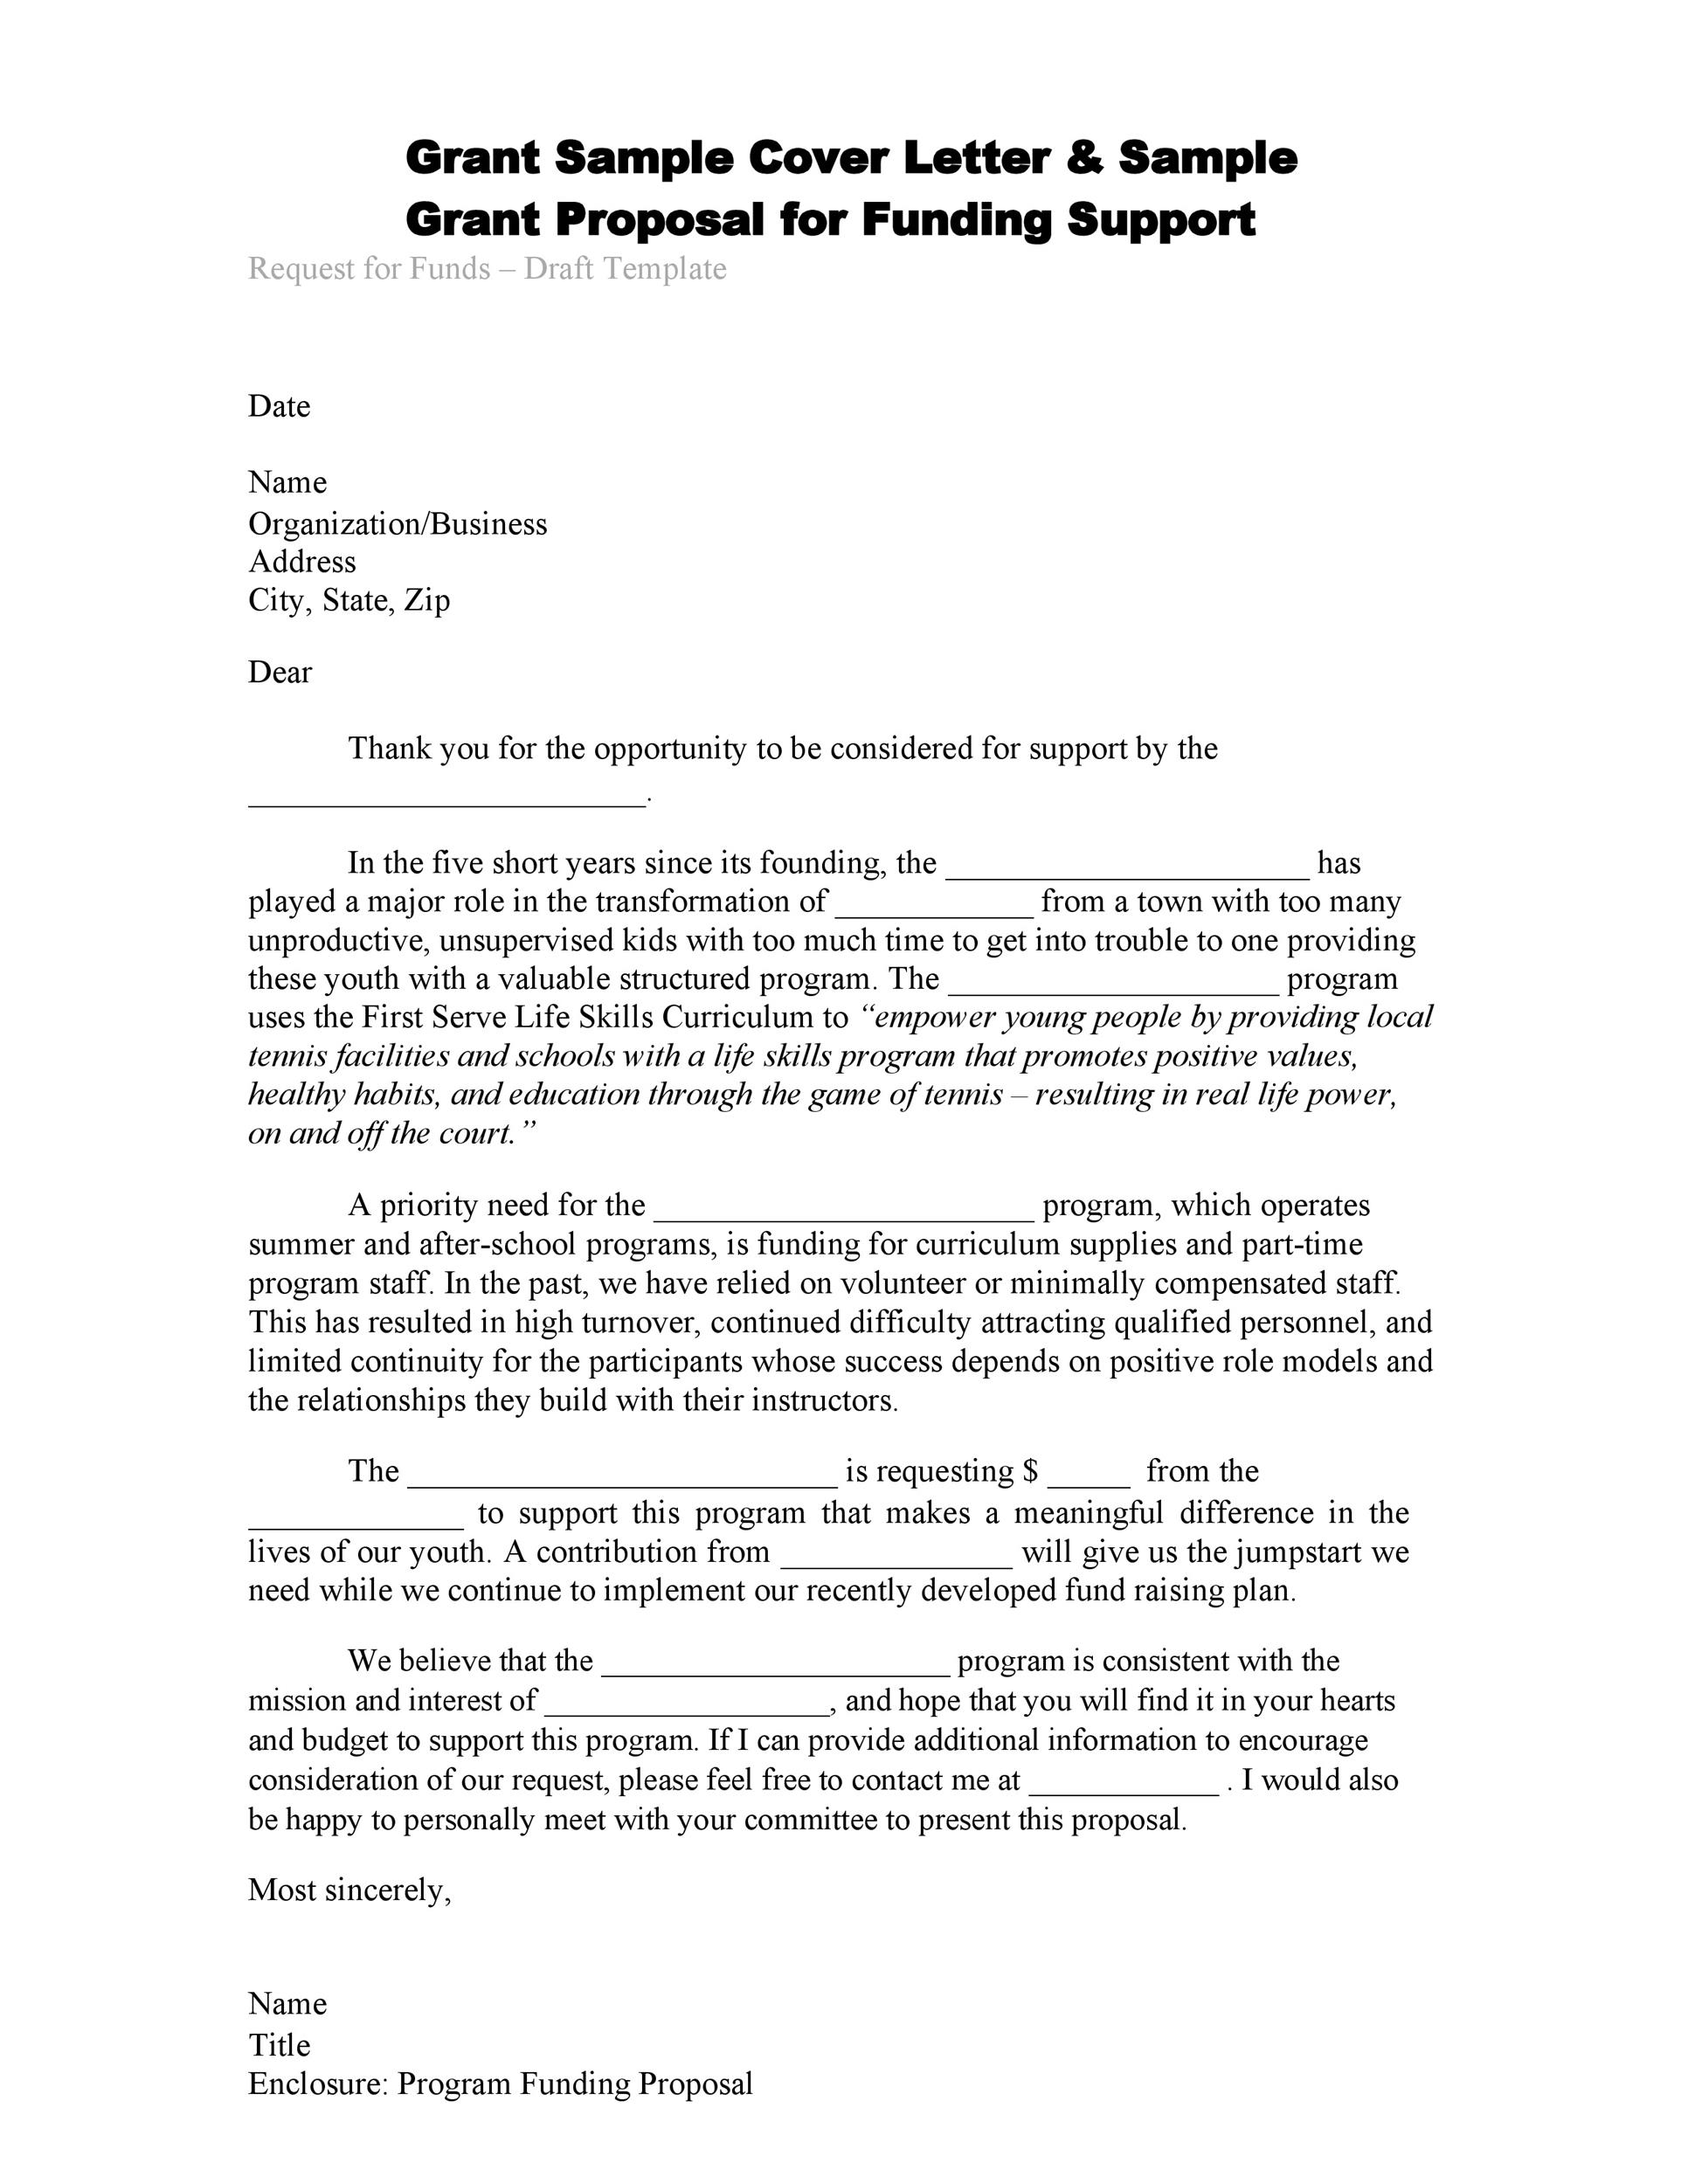 free-grant-proposal-cover-letter-template-how-to-write-a-proposal